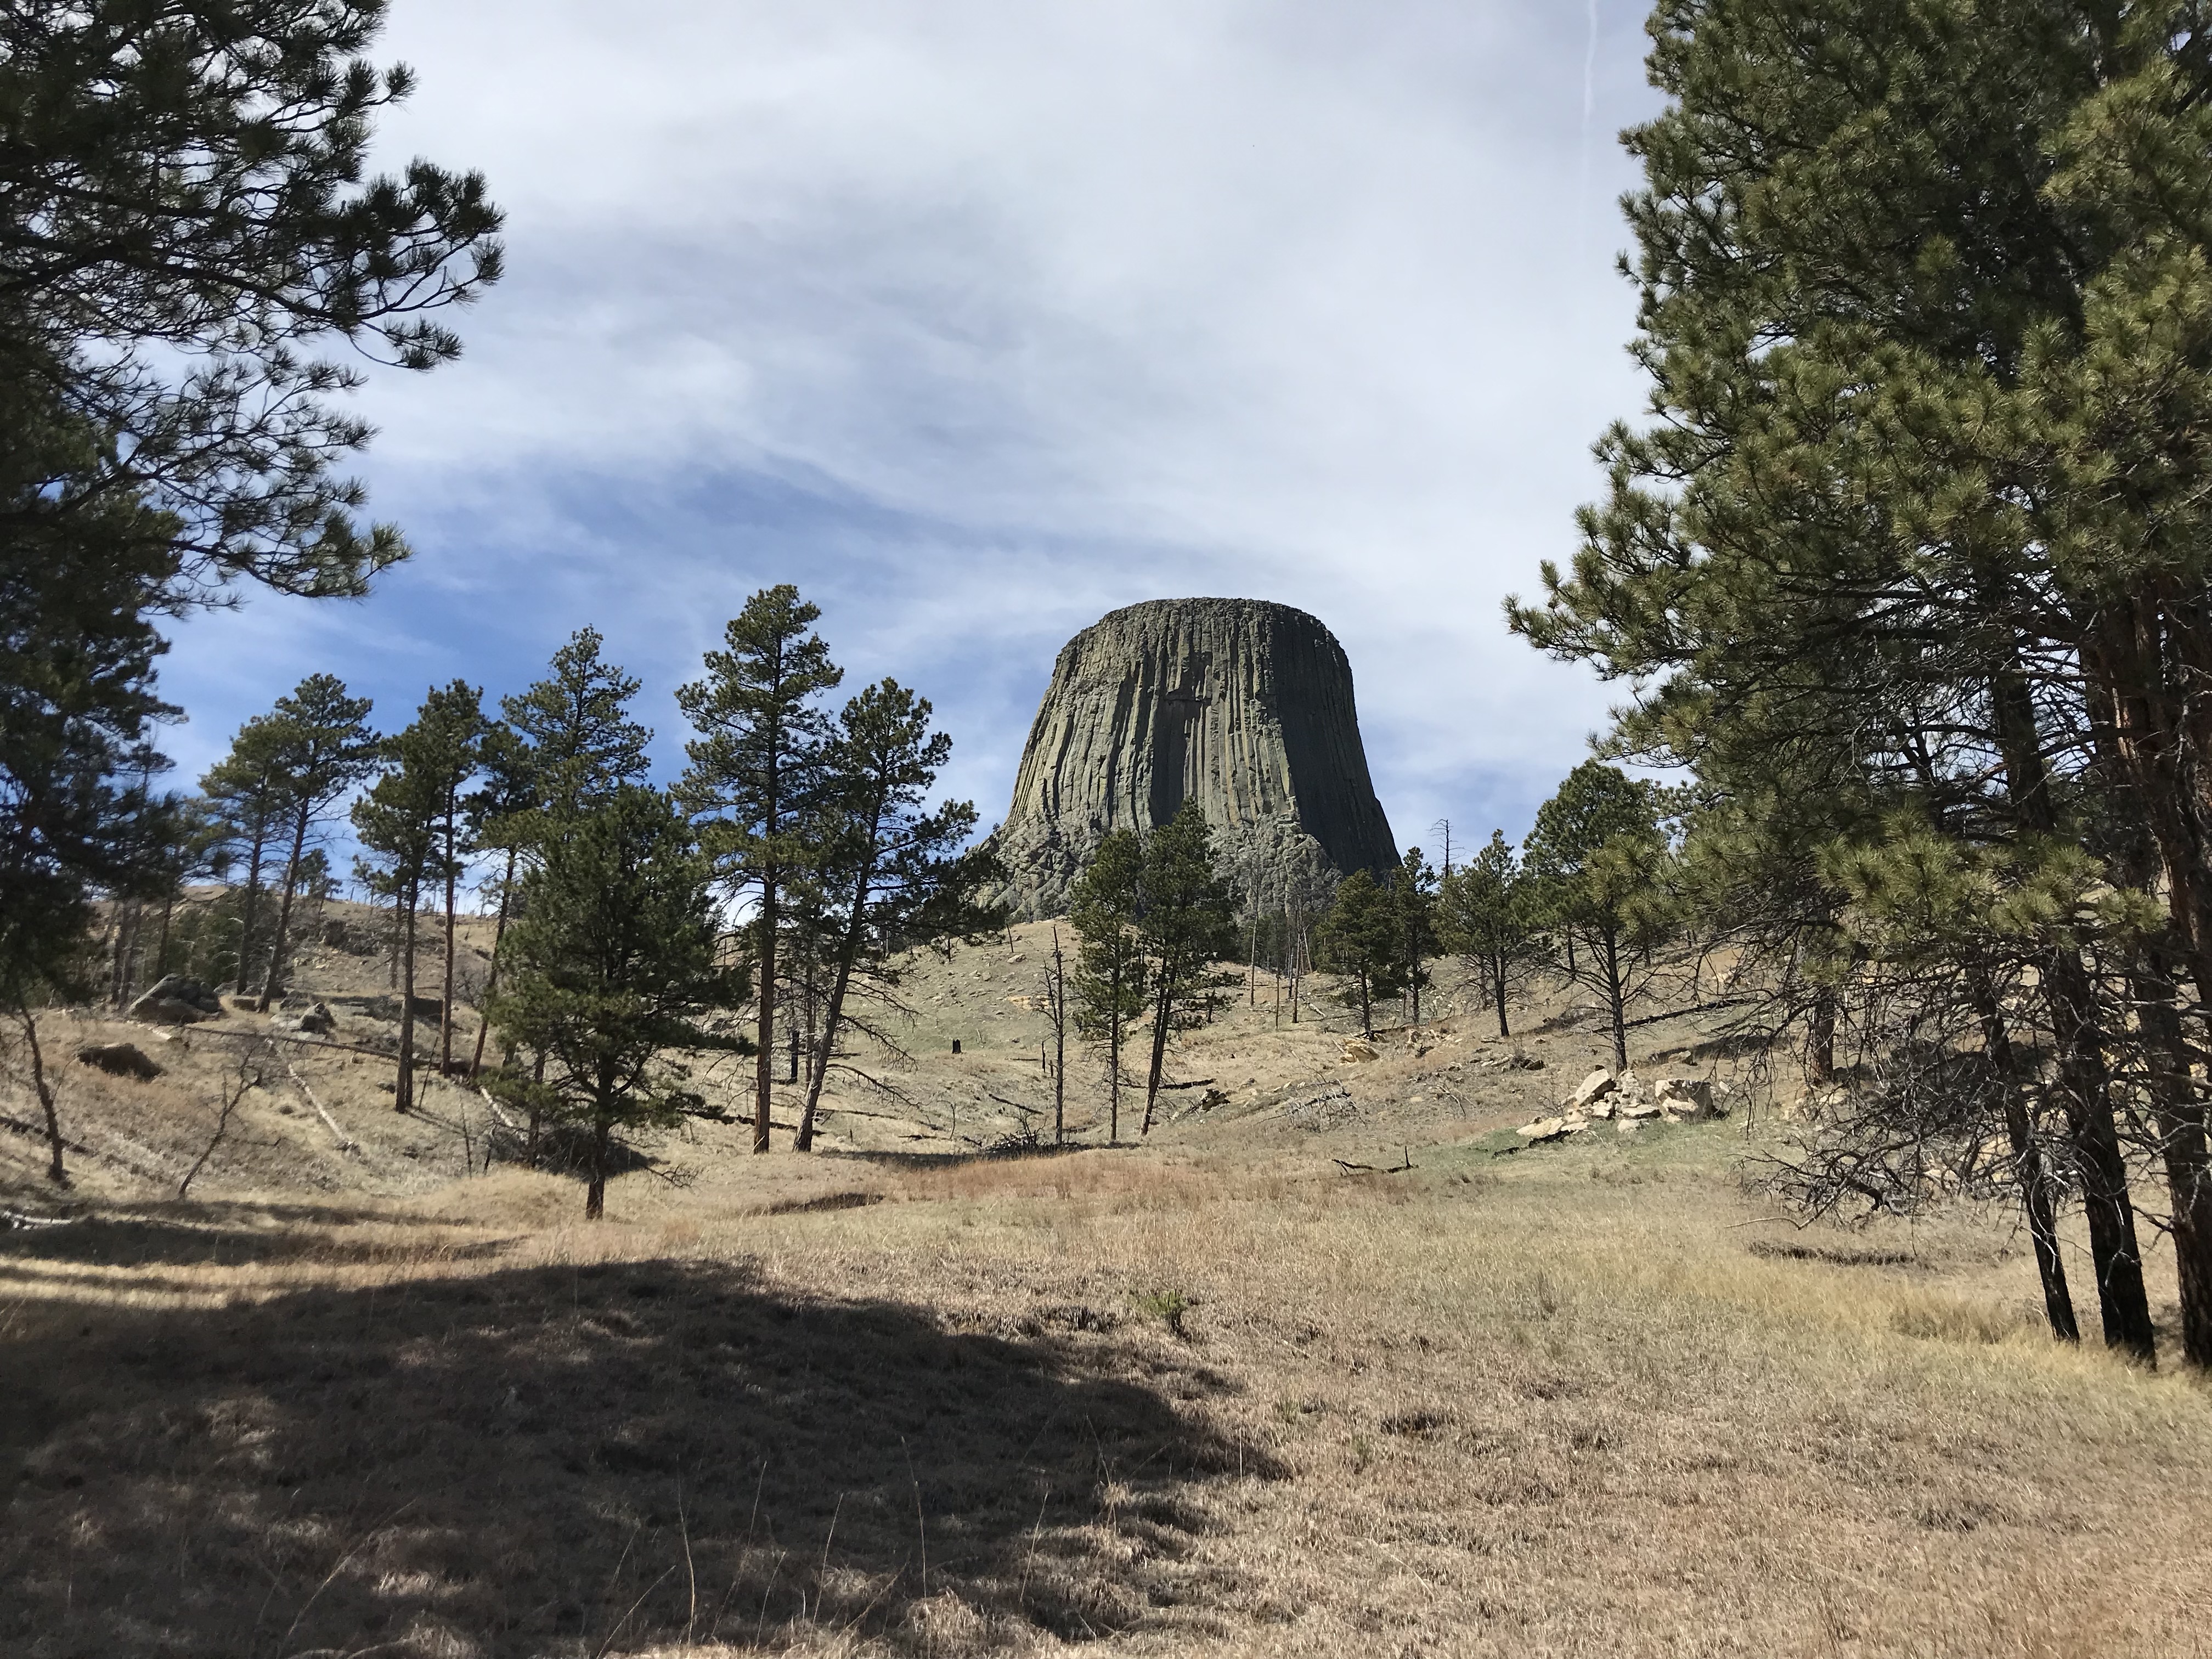 View up a hill covered in brown grass and sparse, pine trees. A tall, rock monolith rises from behind the crest of the hill. 